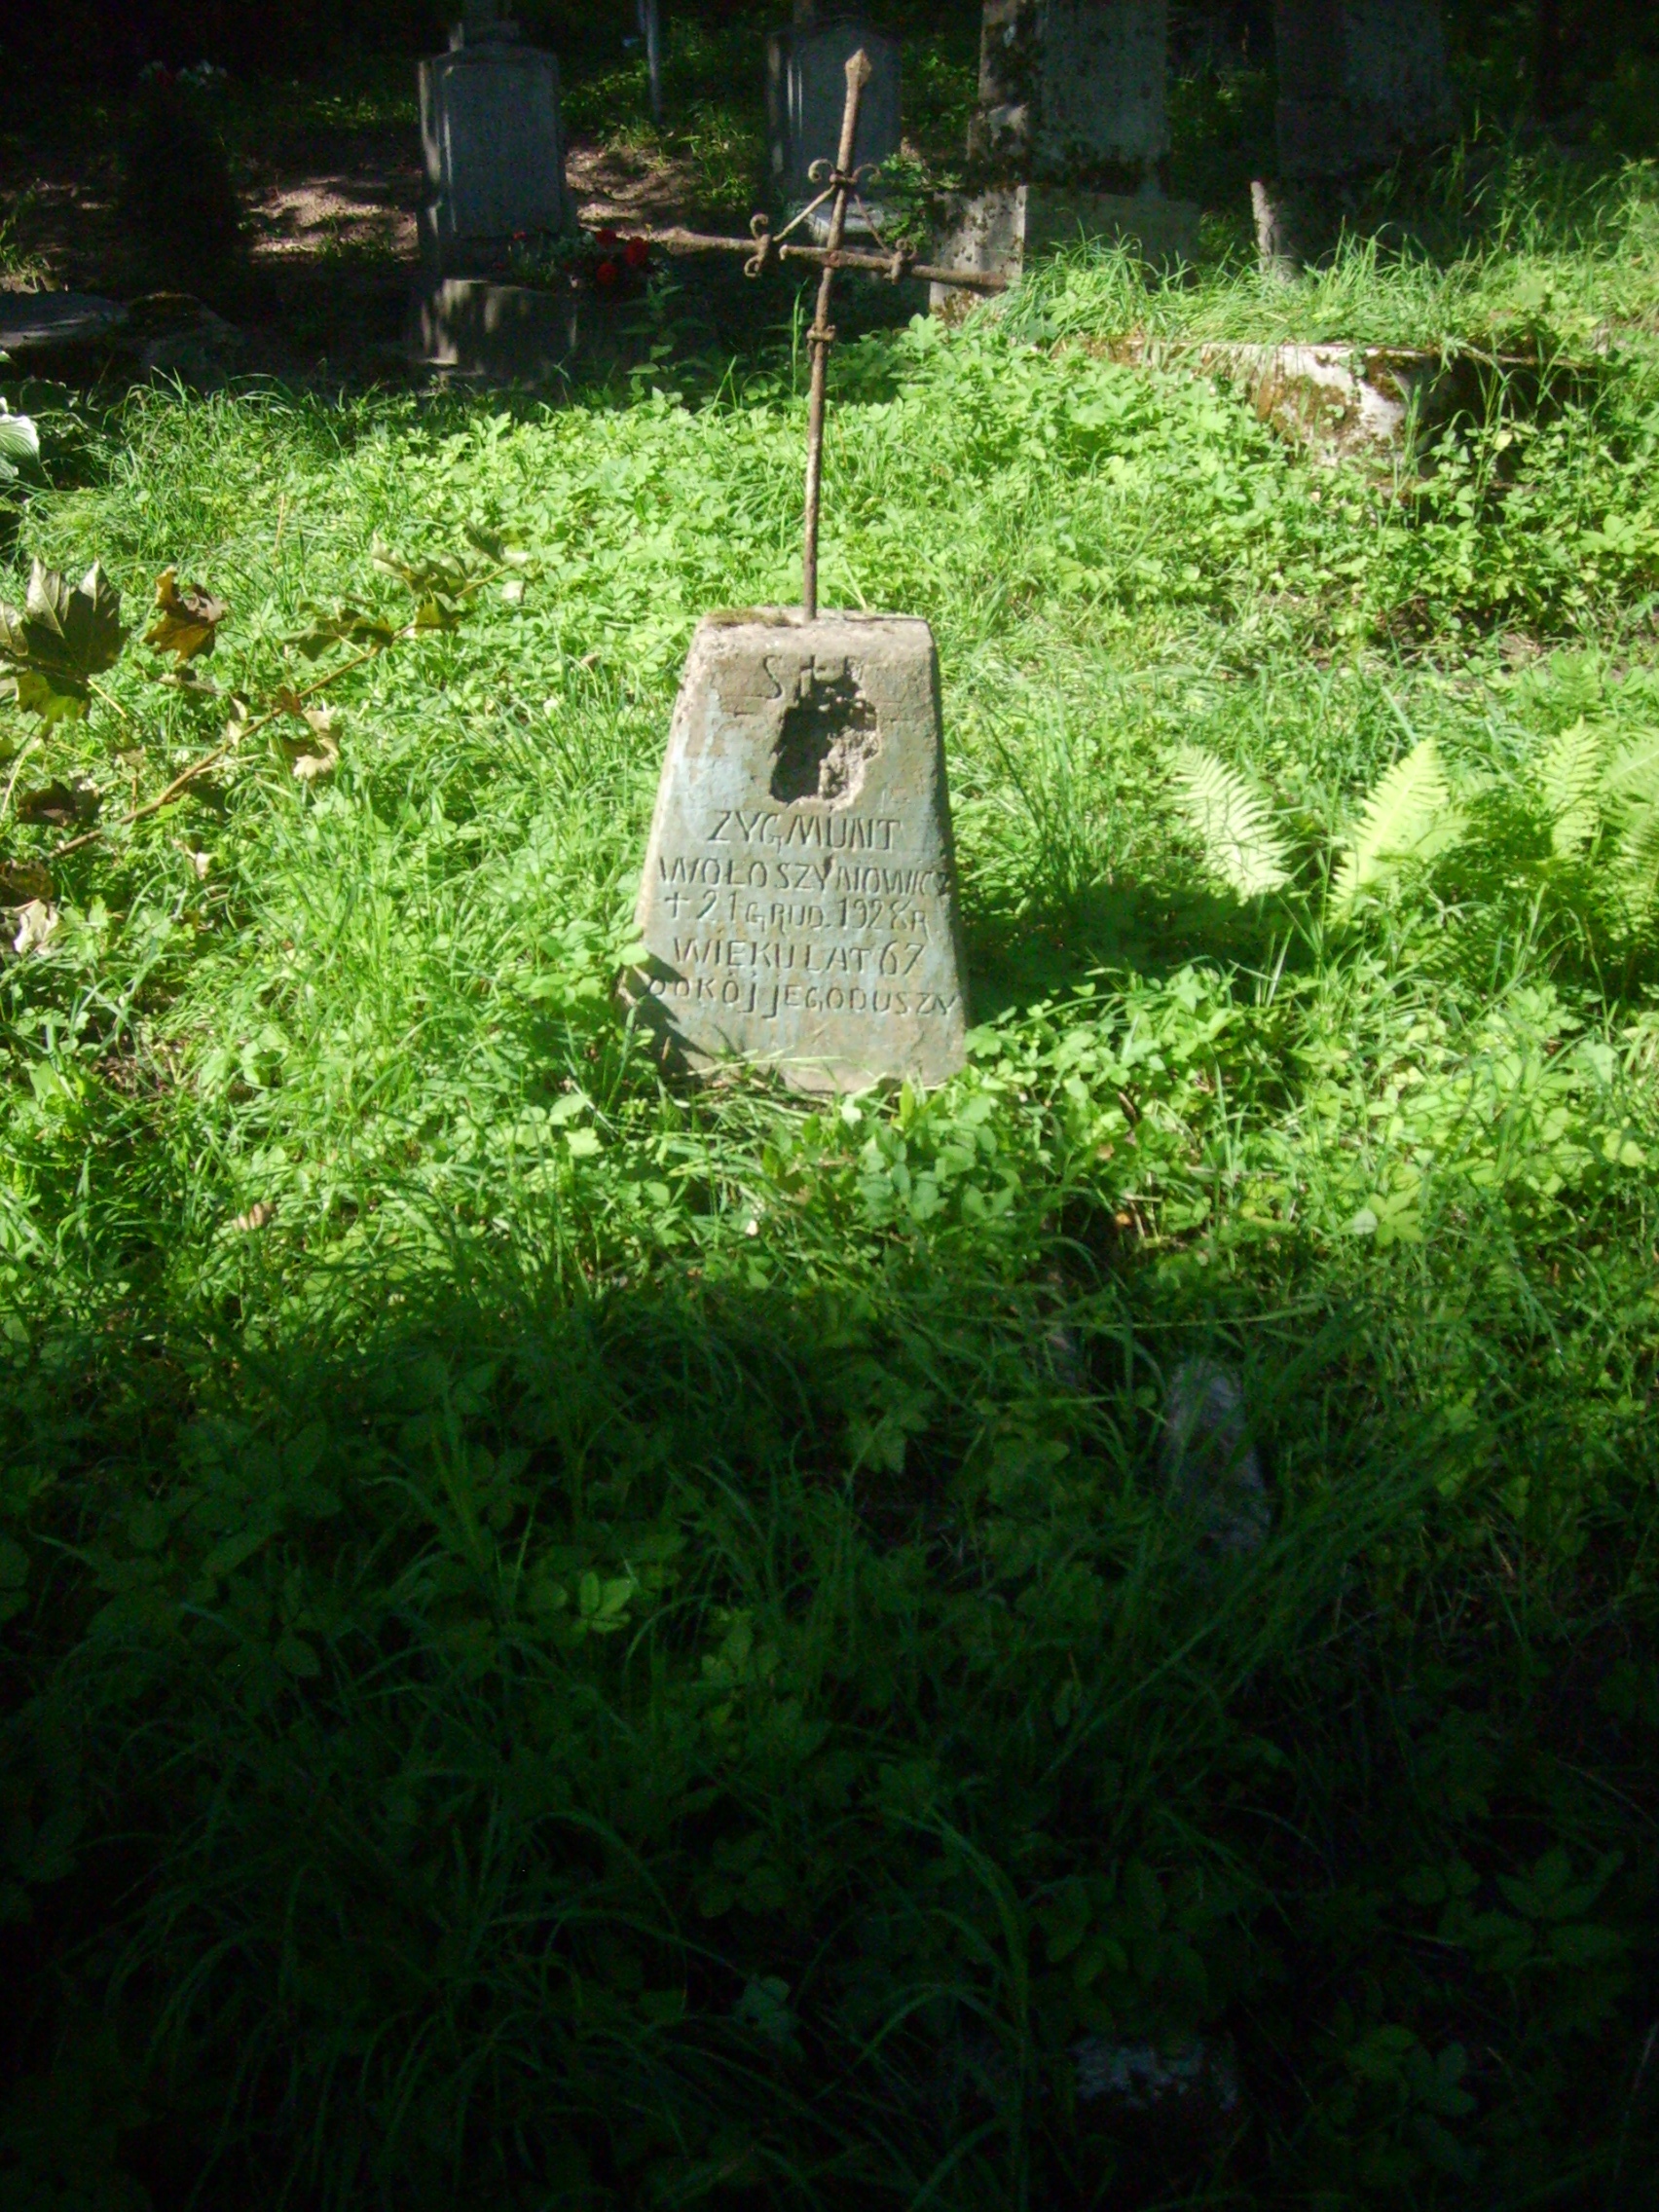 Tombstone of Zygmunt Voloshinovich, Ross cemetery in Vilnius, as of 2013.